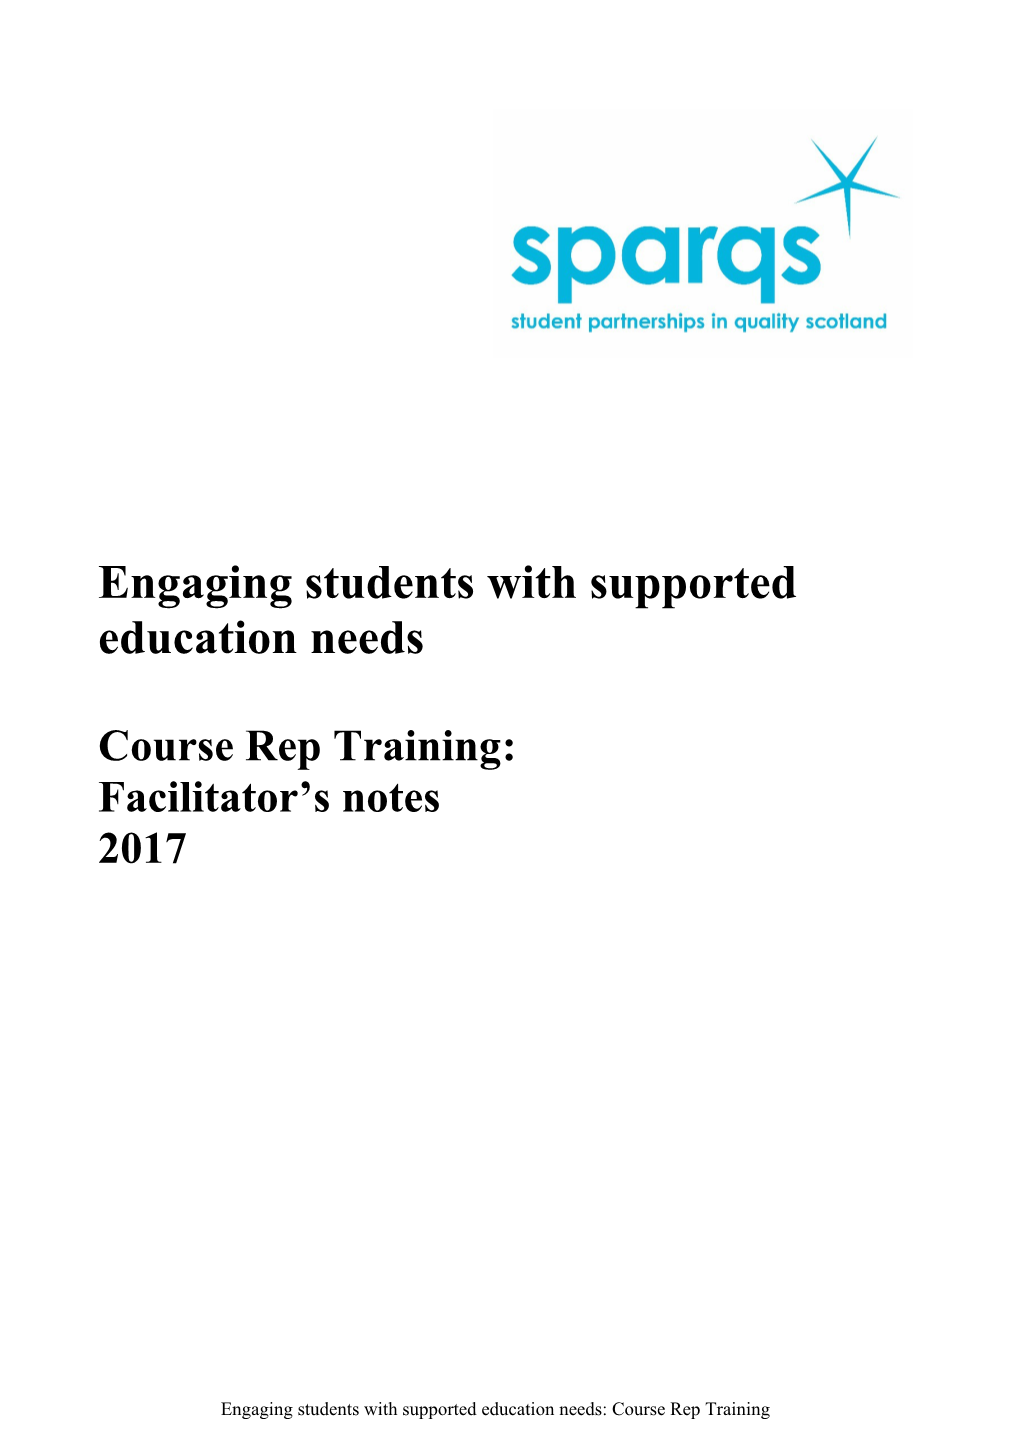 Engaging Students with Supported Education Needs